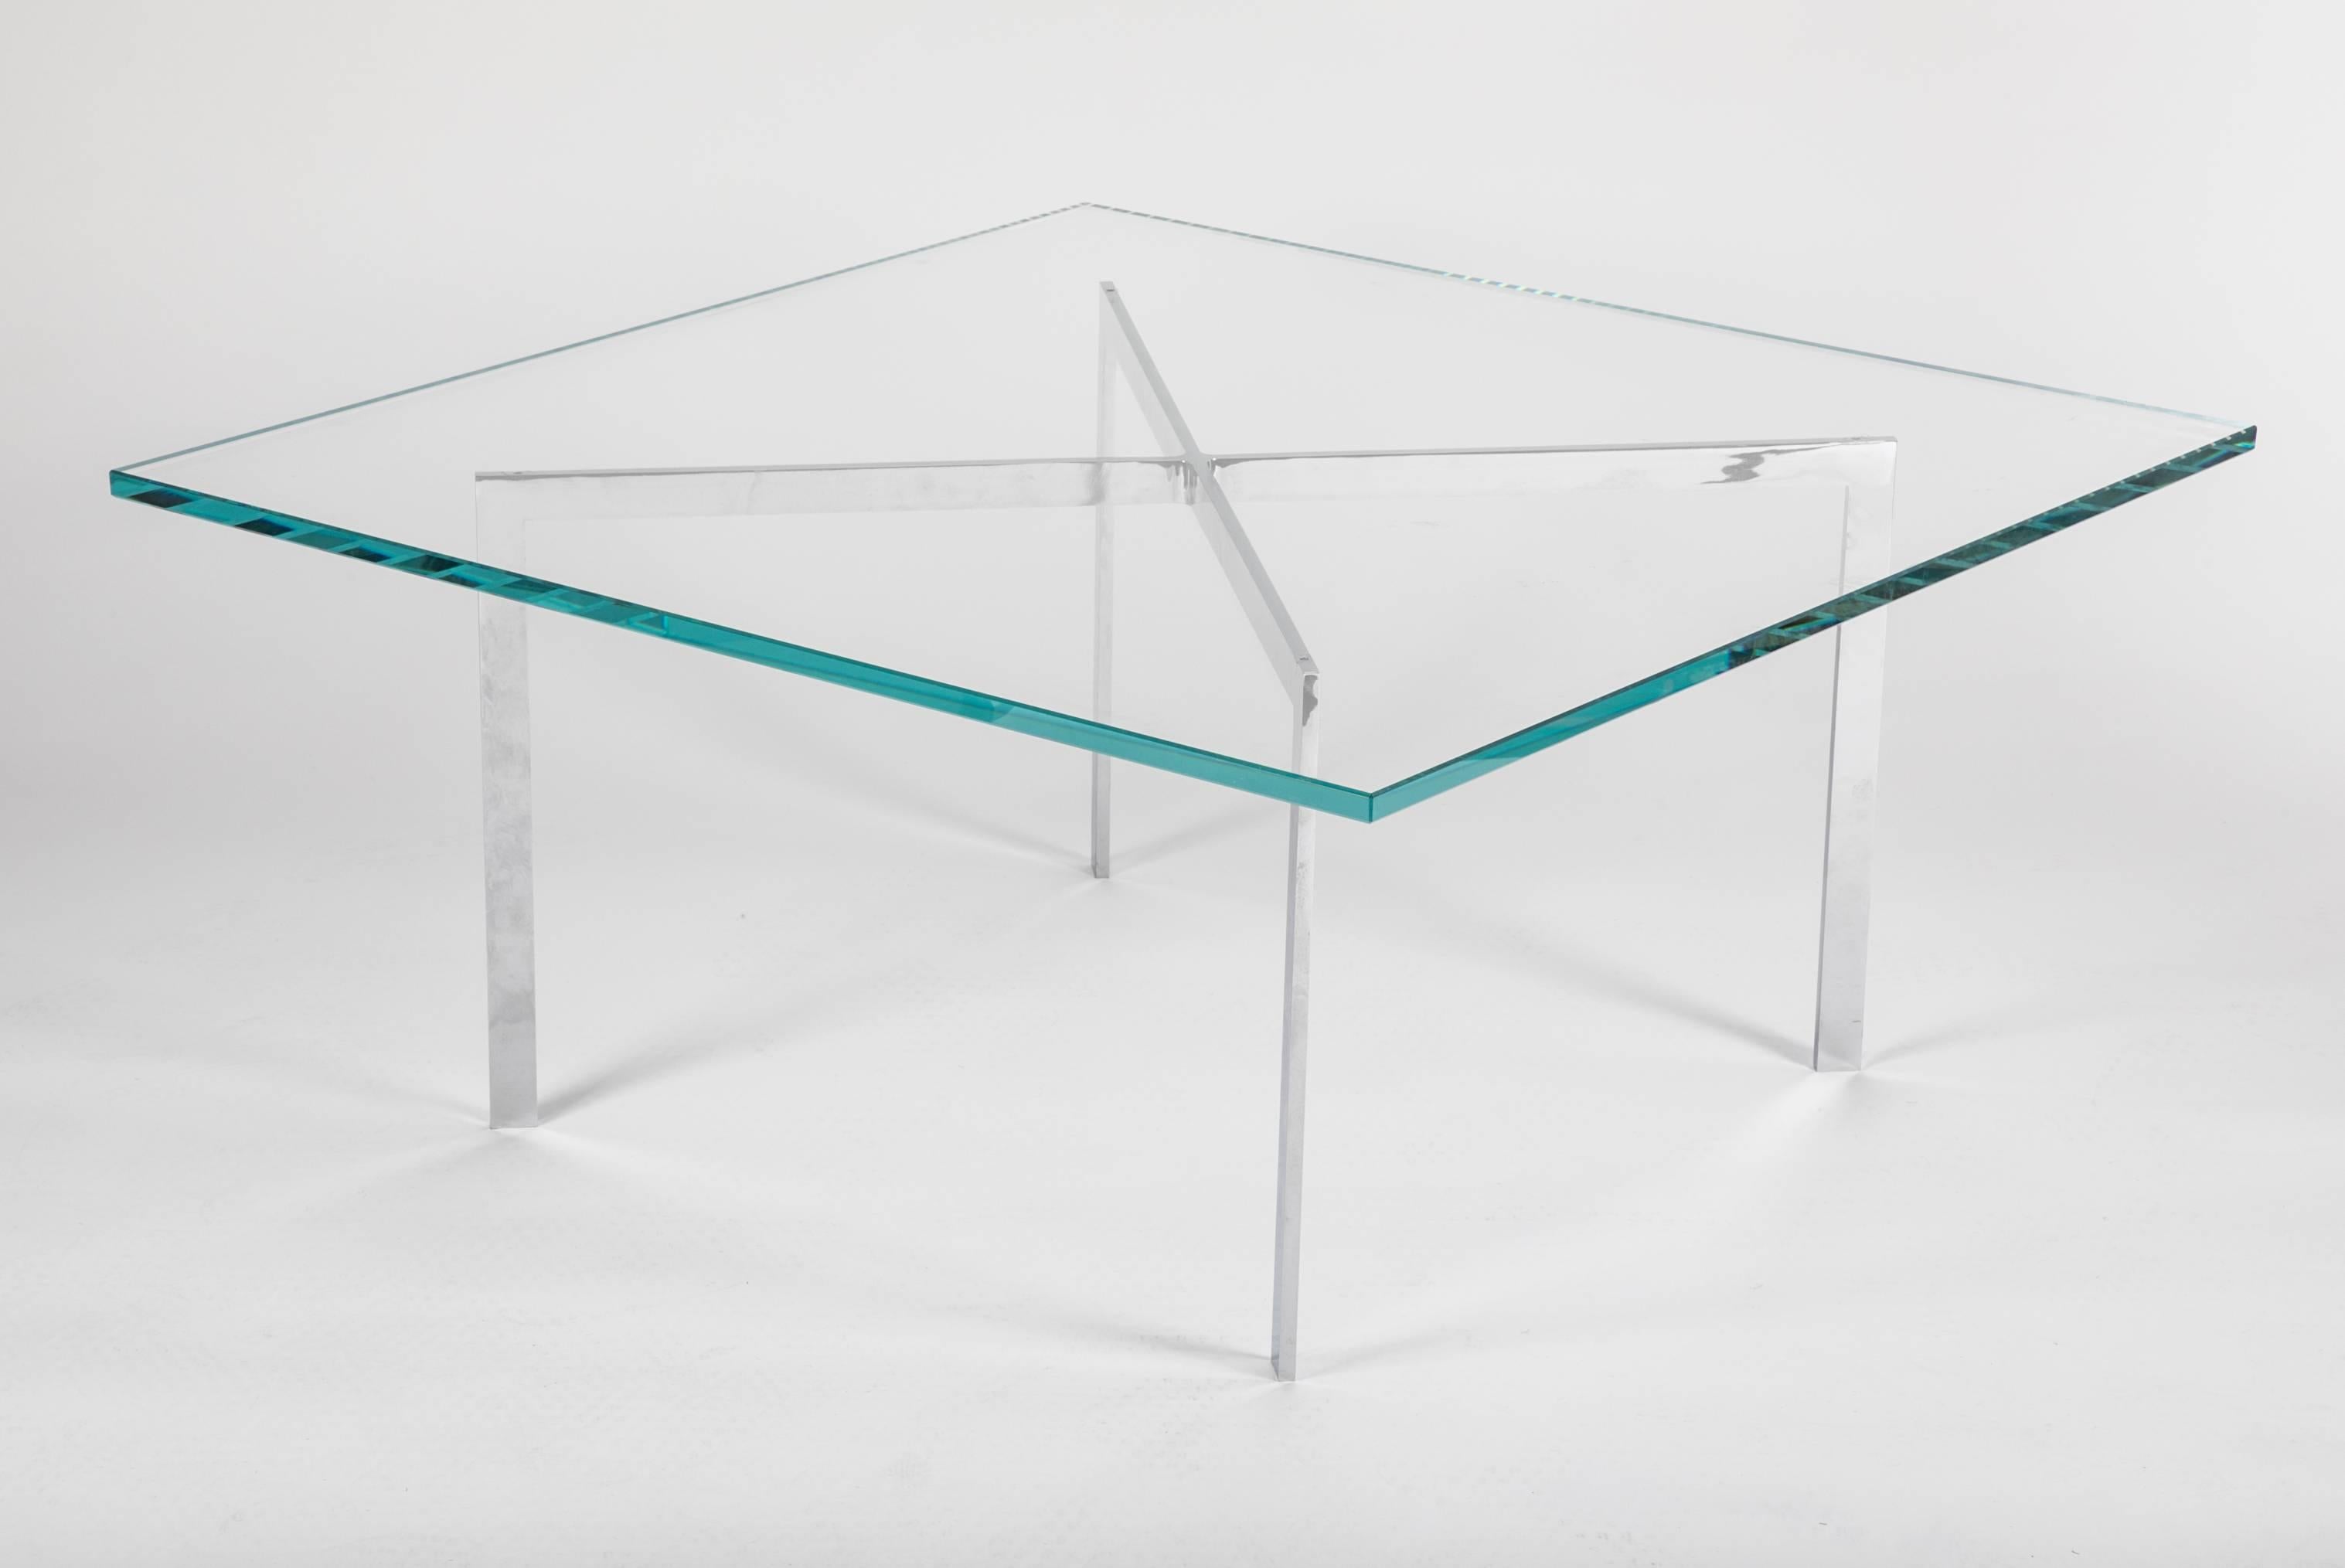 Iconic Barcelona coffee table with minimalist design, exemplary of the Bauhaus movement. Comprised of seamless architectural base with X form in polished chromed steel, with thick 3/4